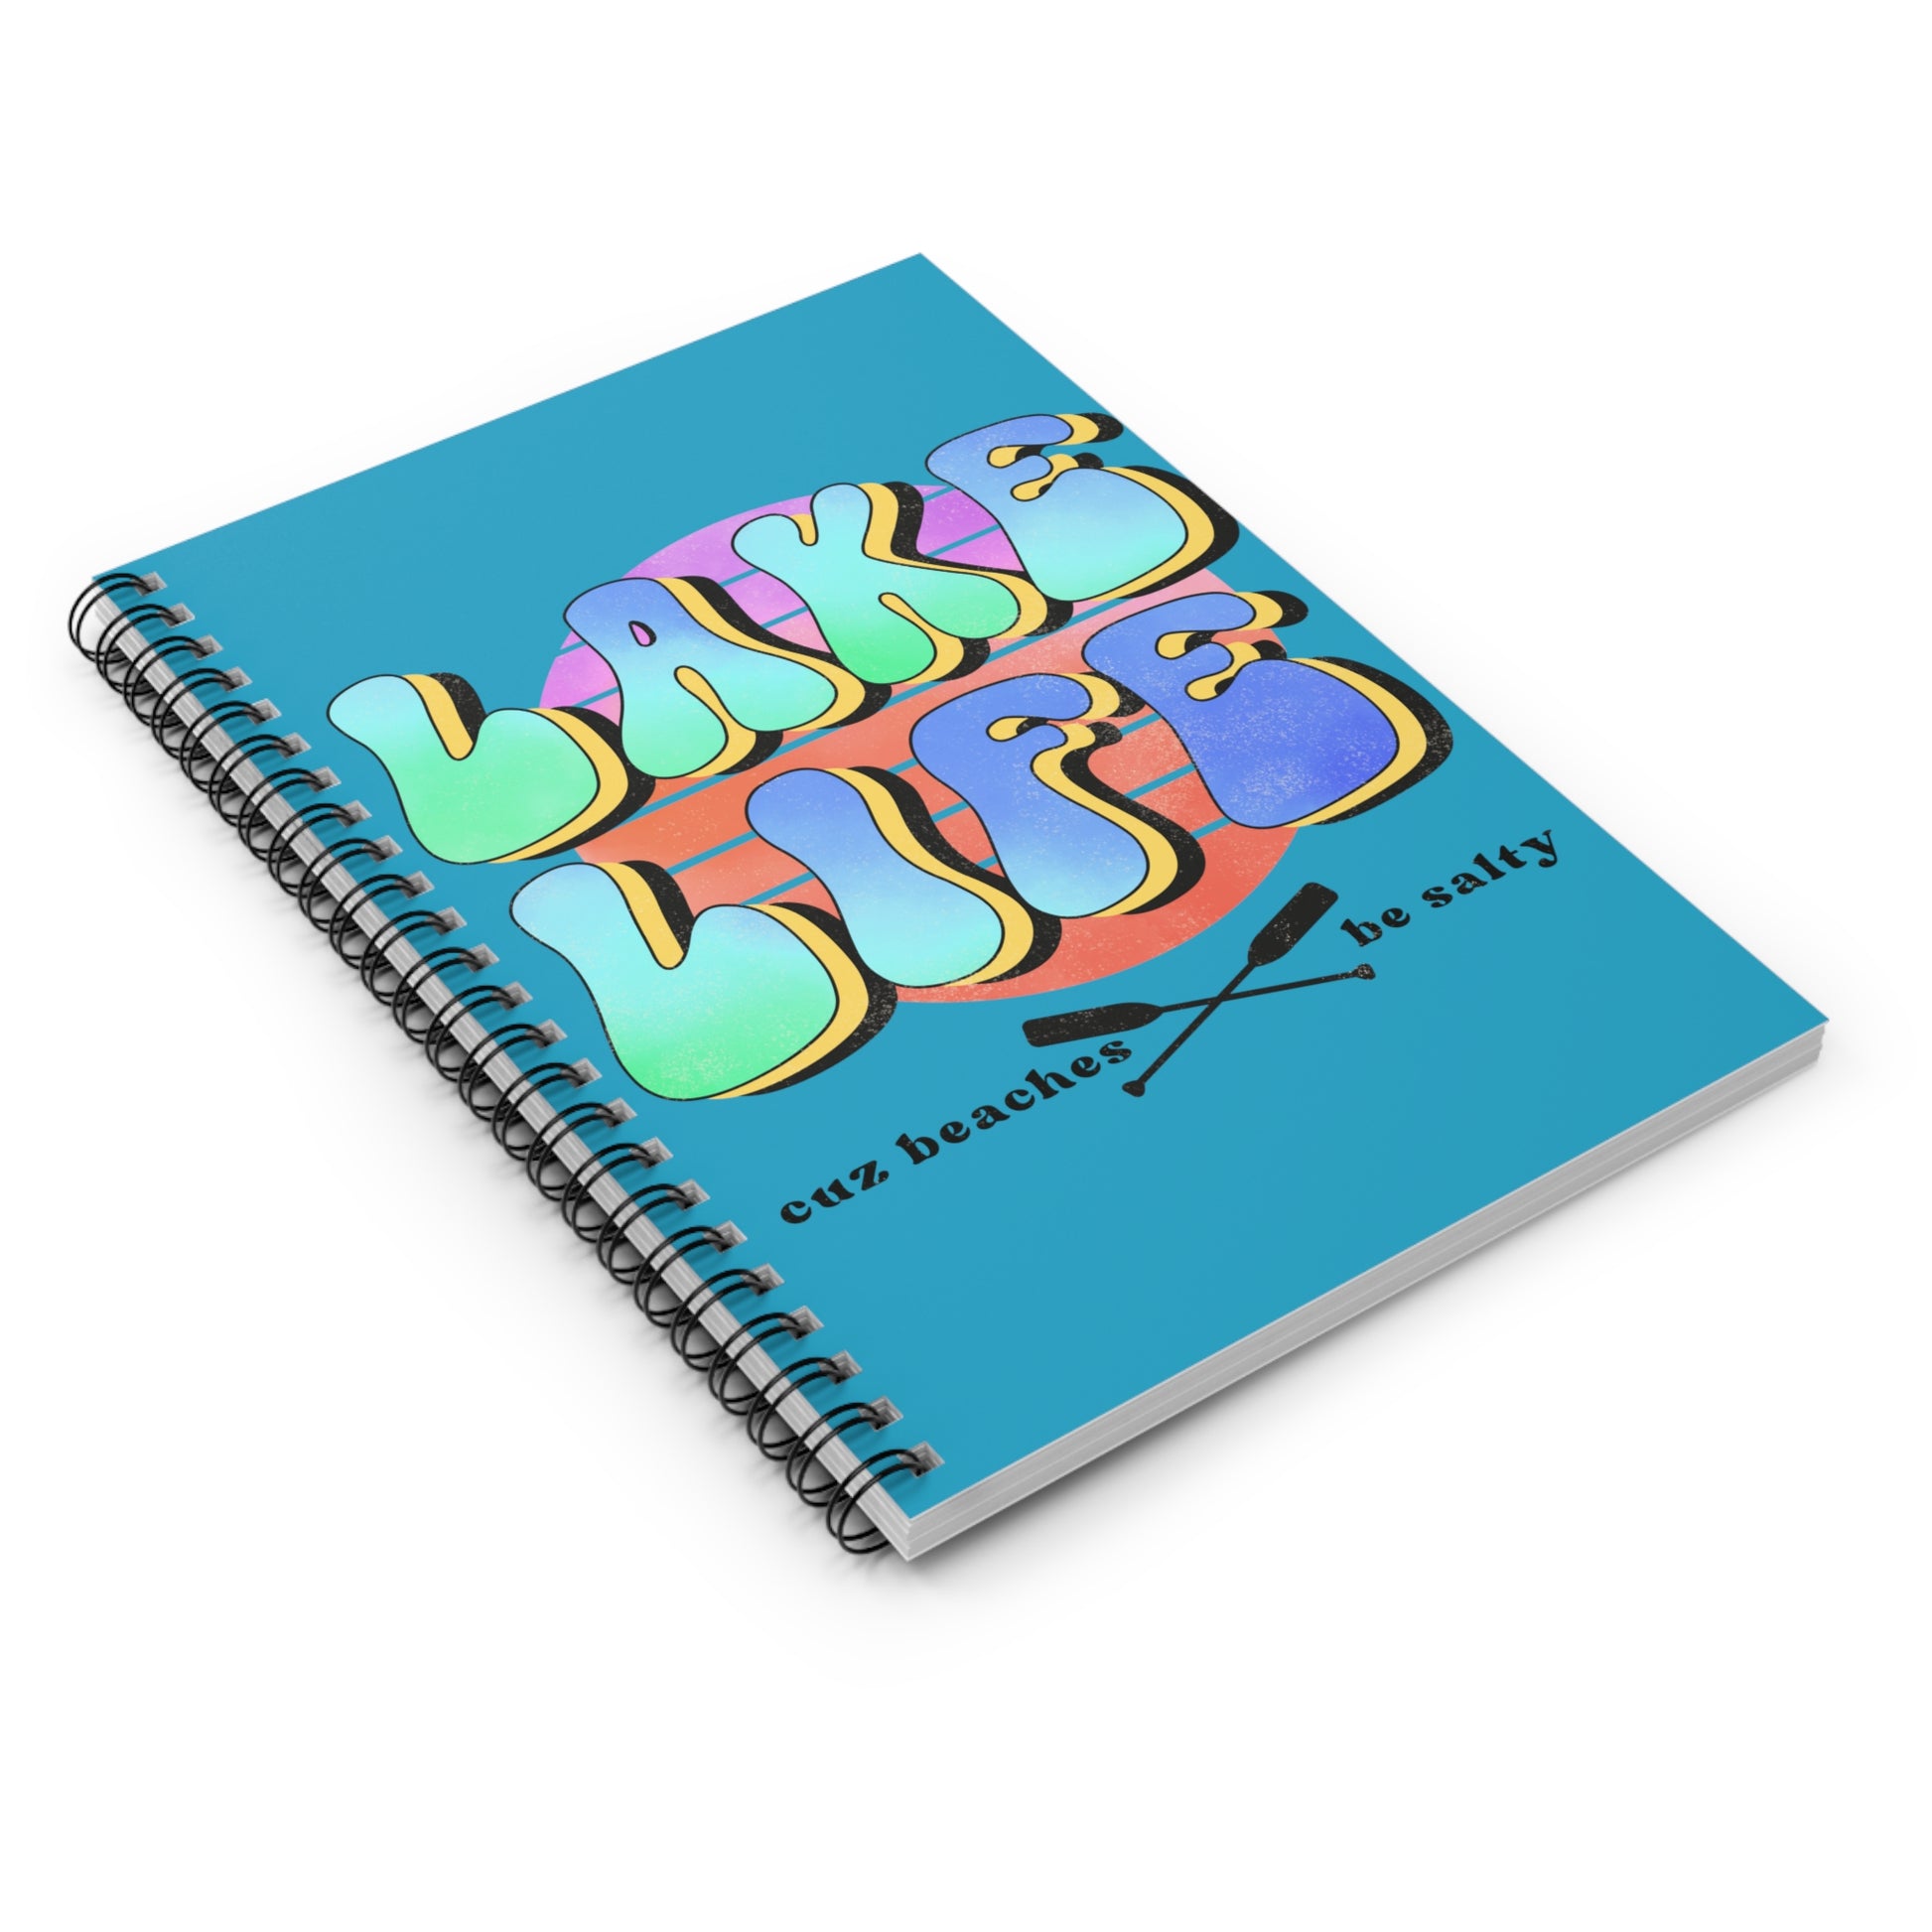 Lake Life: Spiral Notebook - Log Books - Journals - Diaries - and More Custom Printed by TheGlassyLass